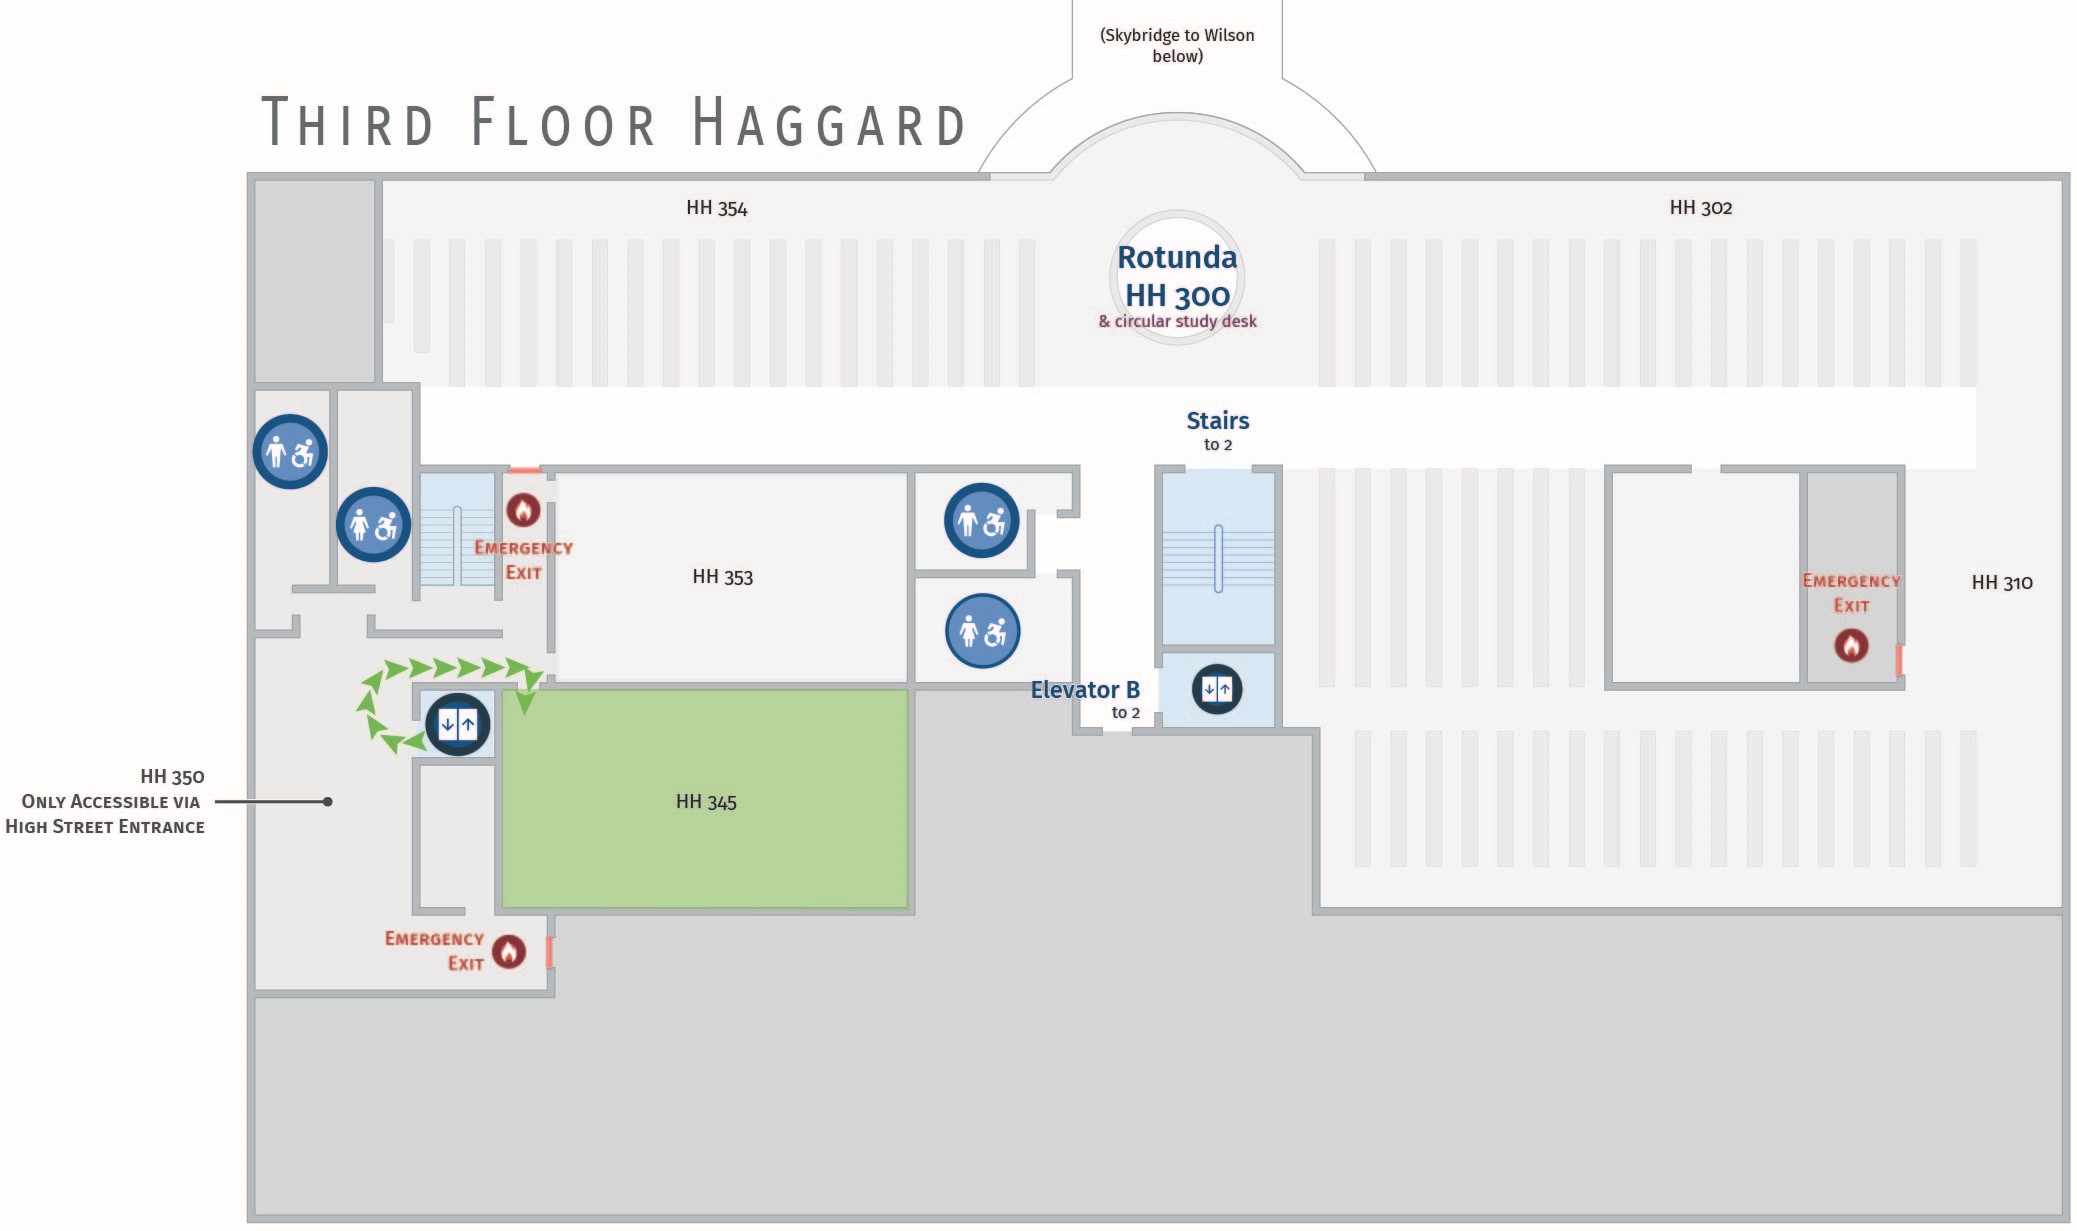 Floor plan, third floor of Haggard with accessible path to HH 345.